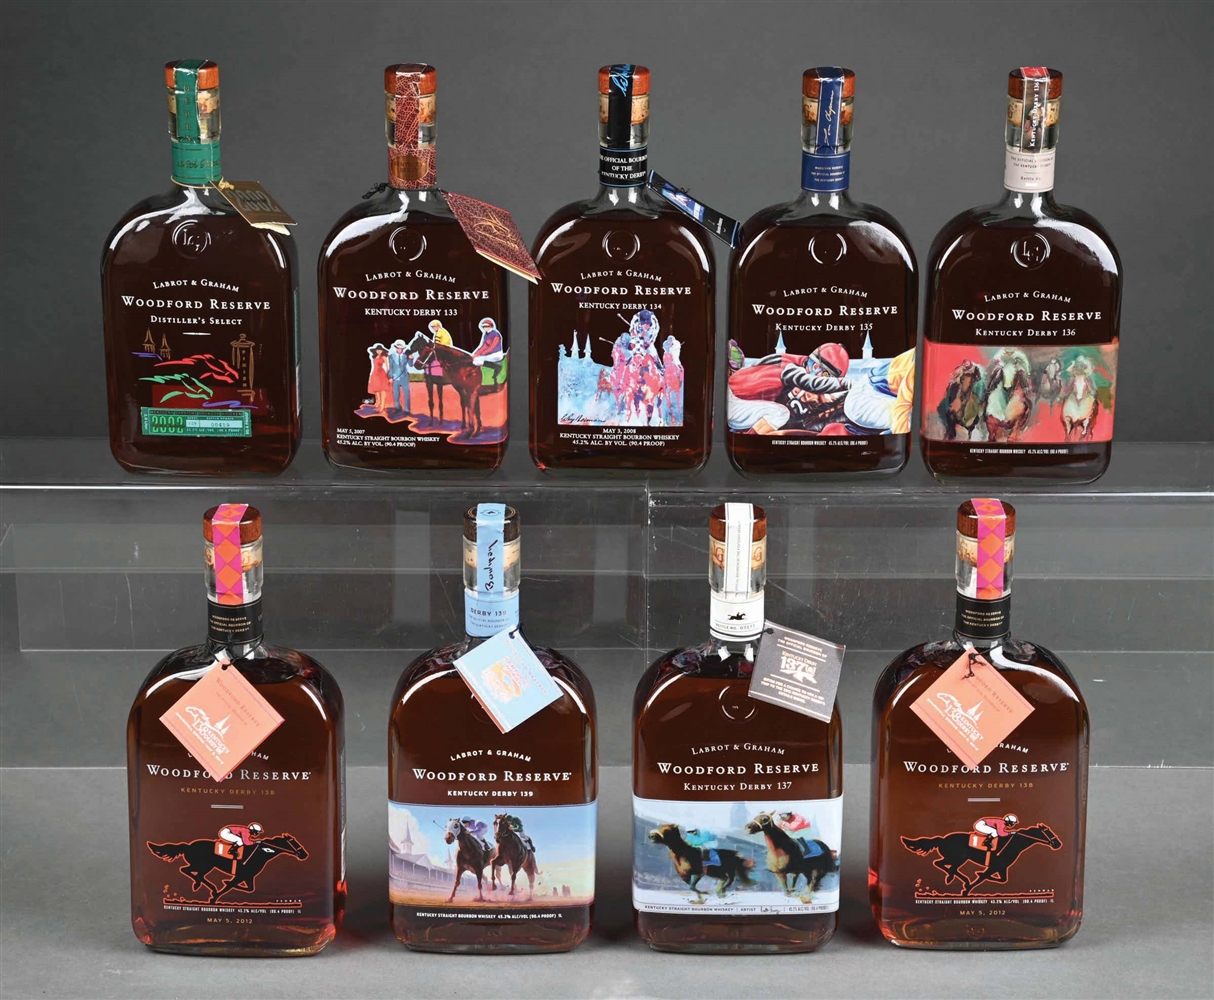 LOT OF 9: LABROT & GRAHAM WOODFORD RESERVE SPECIAL EDITION 1 LITER DERBY BOTTLES